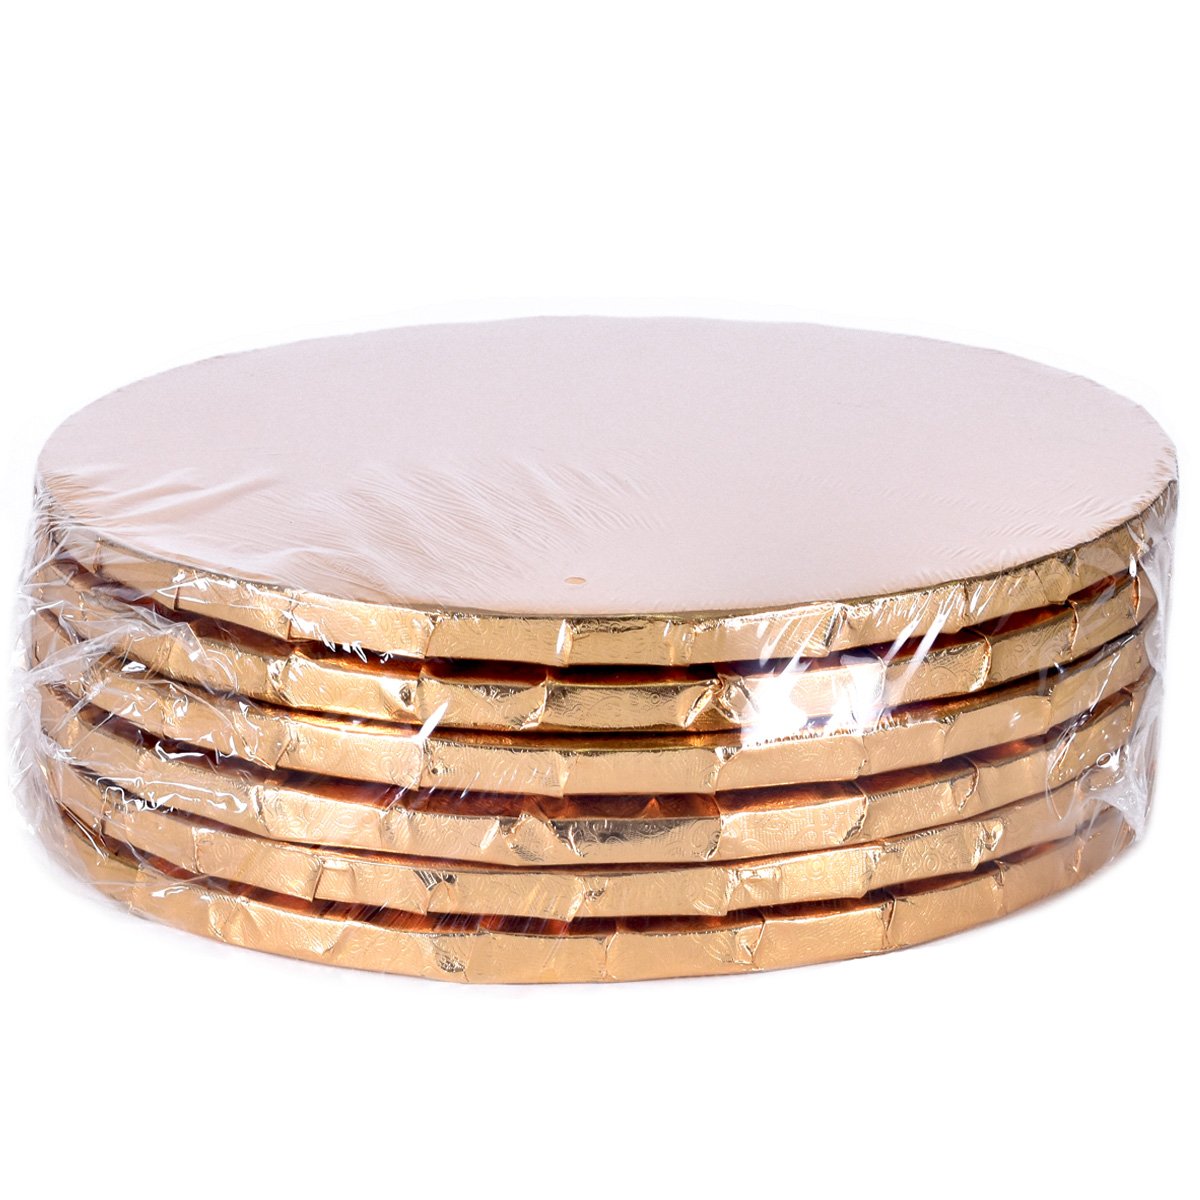 Amazon.com | 20 Pieces White Cake Drums 12 Inch Round Sturdy Cakes Drum  Board 0.5 Inch Thick Cake Drums Bulk for Birthday Home Kitchen Party Baking  Cake Desserts Supplies Favors: Cake Stands